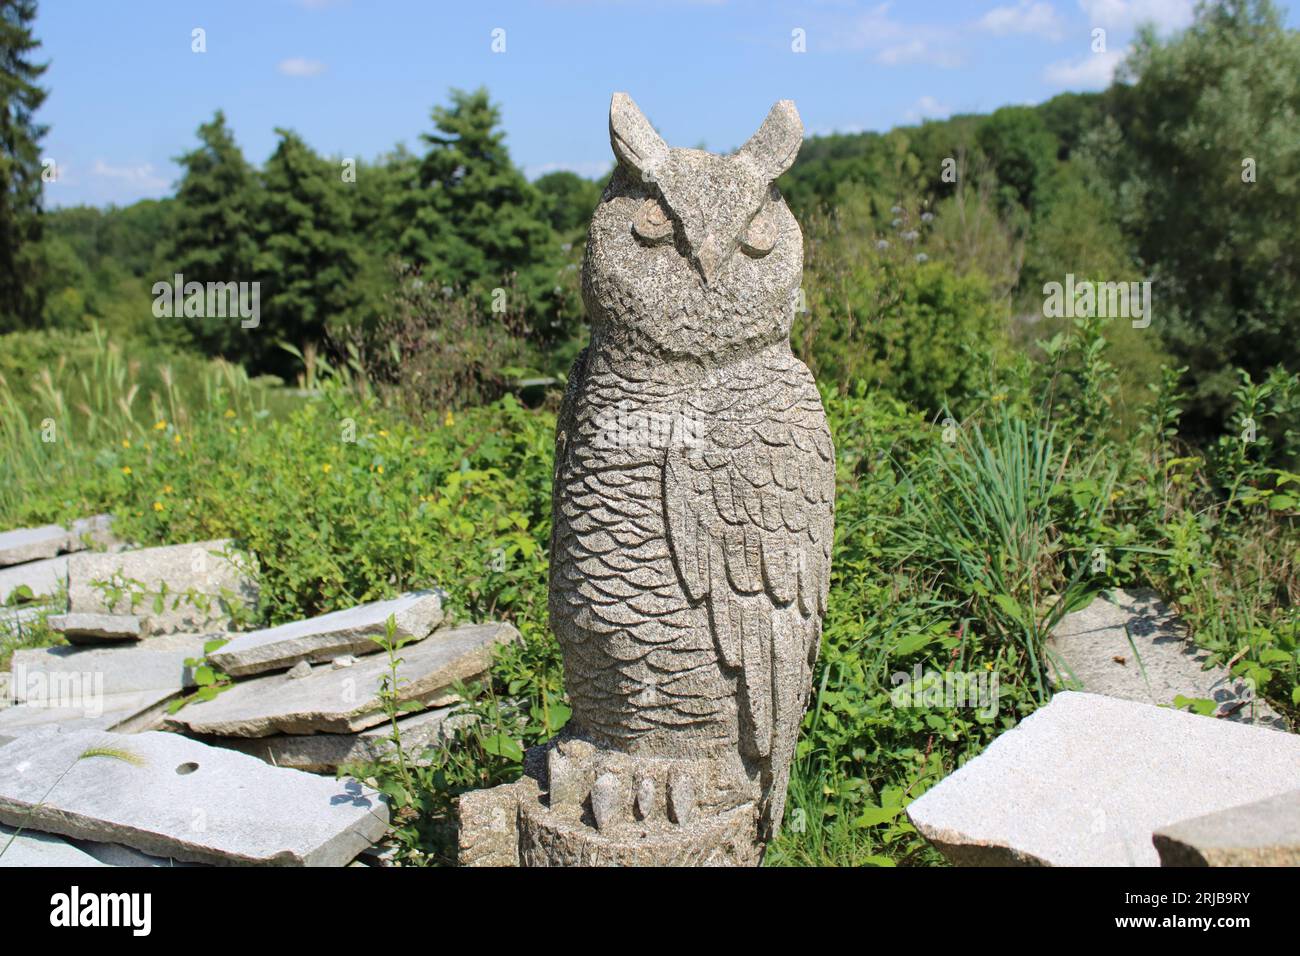 A statue of an owl carved in granite by the famous 19th century artist François Michaud located in the village of Masgot in Creuse region of France. Stock Photo